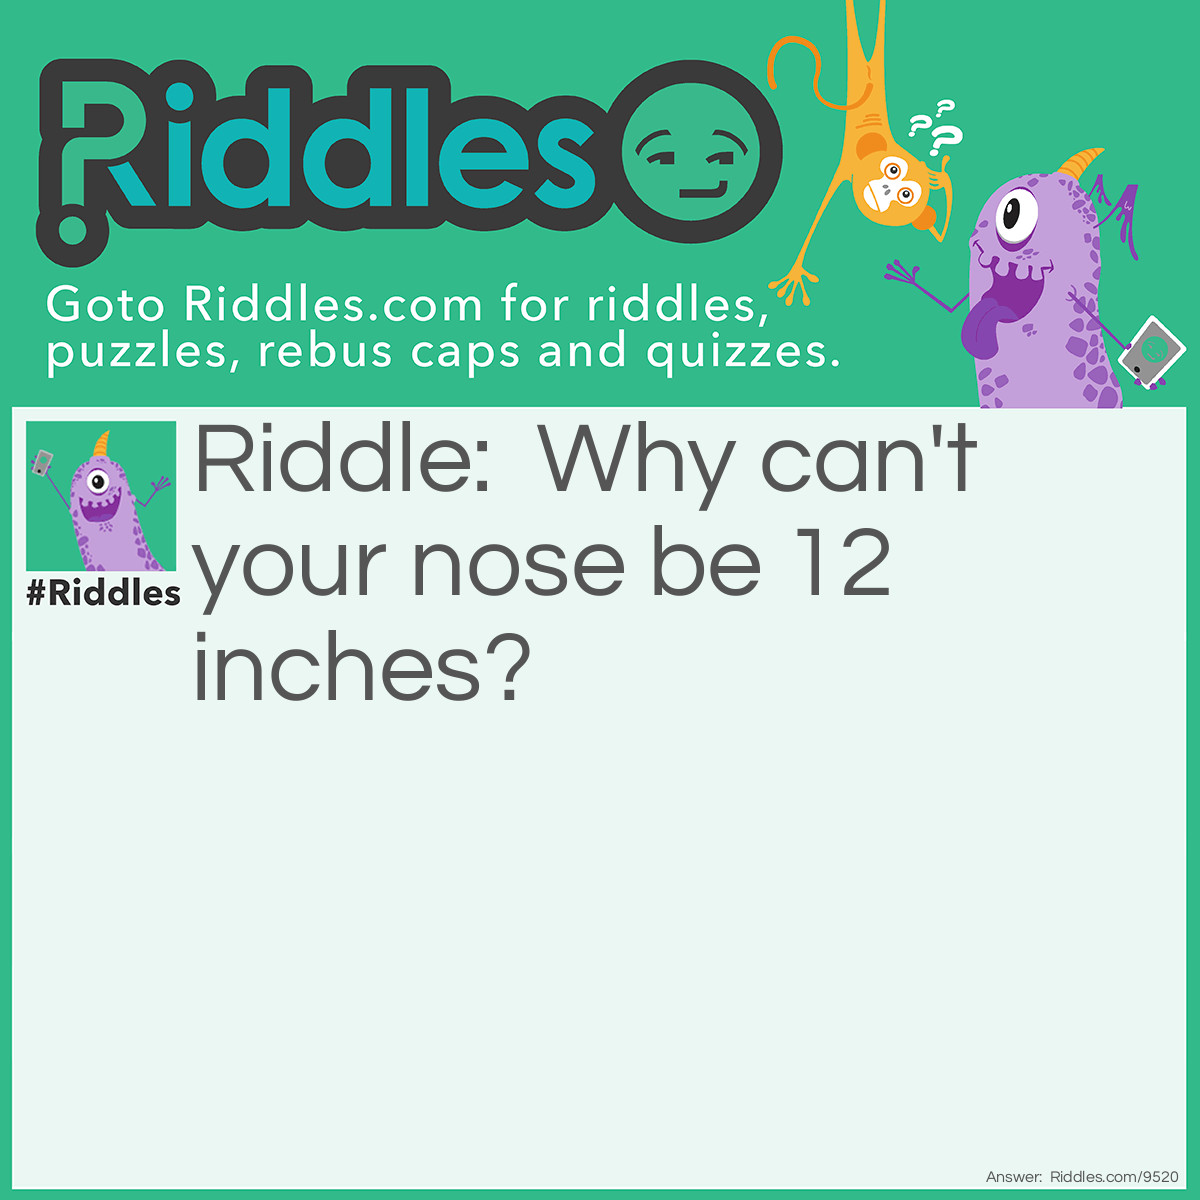 Riddle: Why can't your nose be 12 inches? Answer: Because then it would be a foot